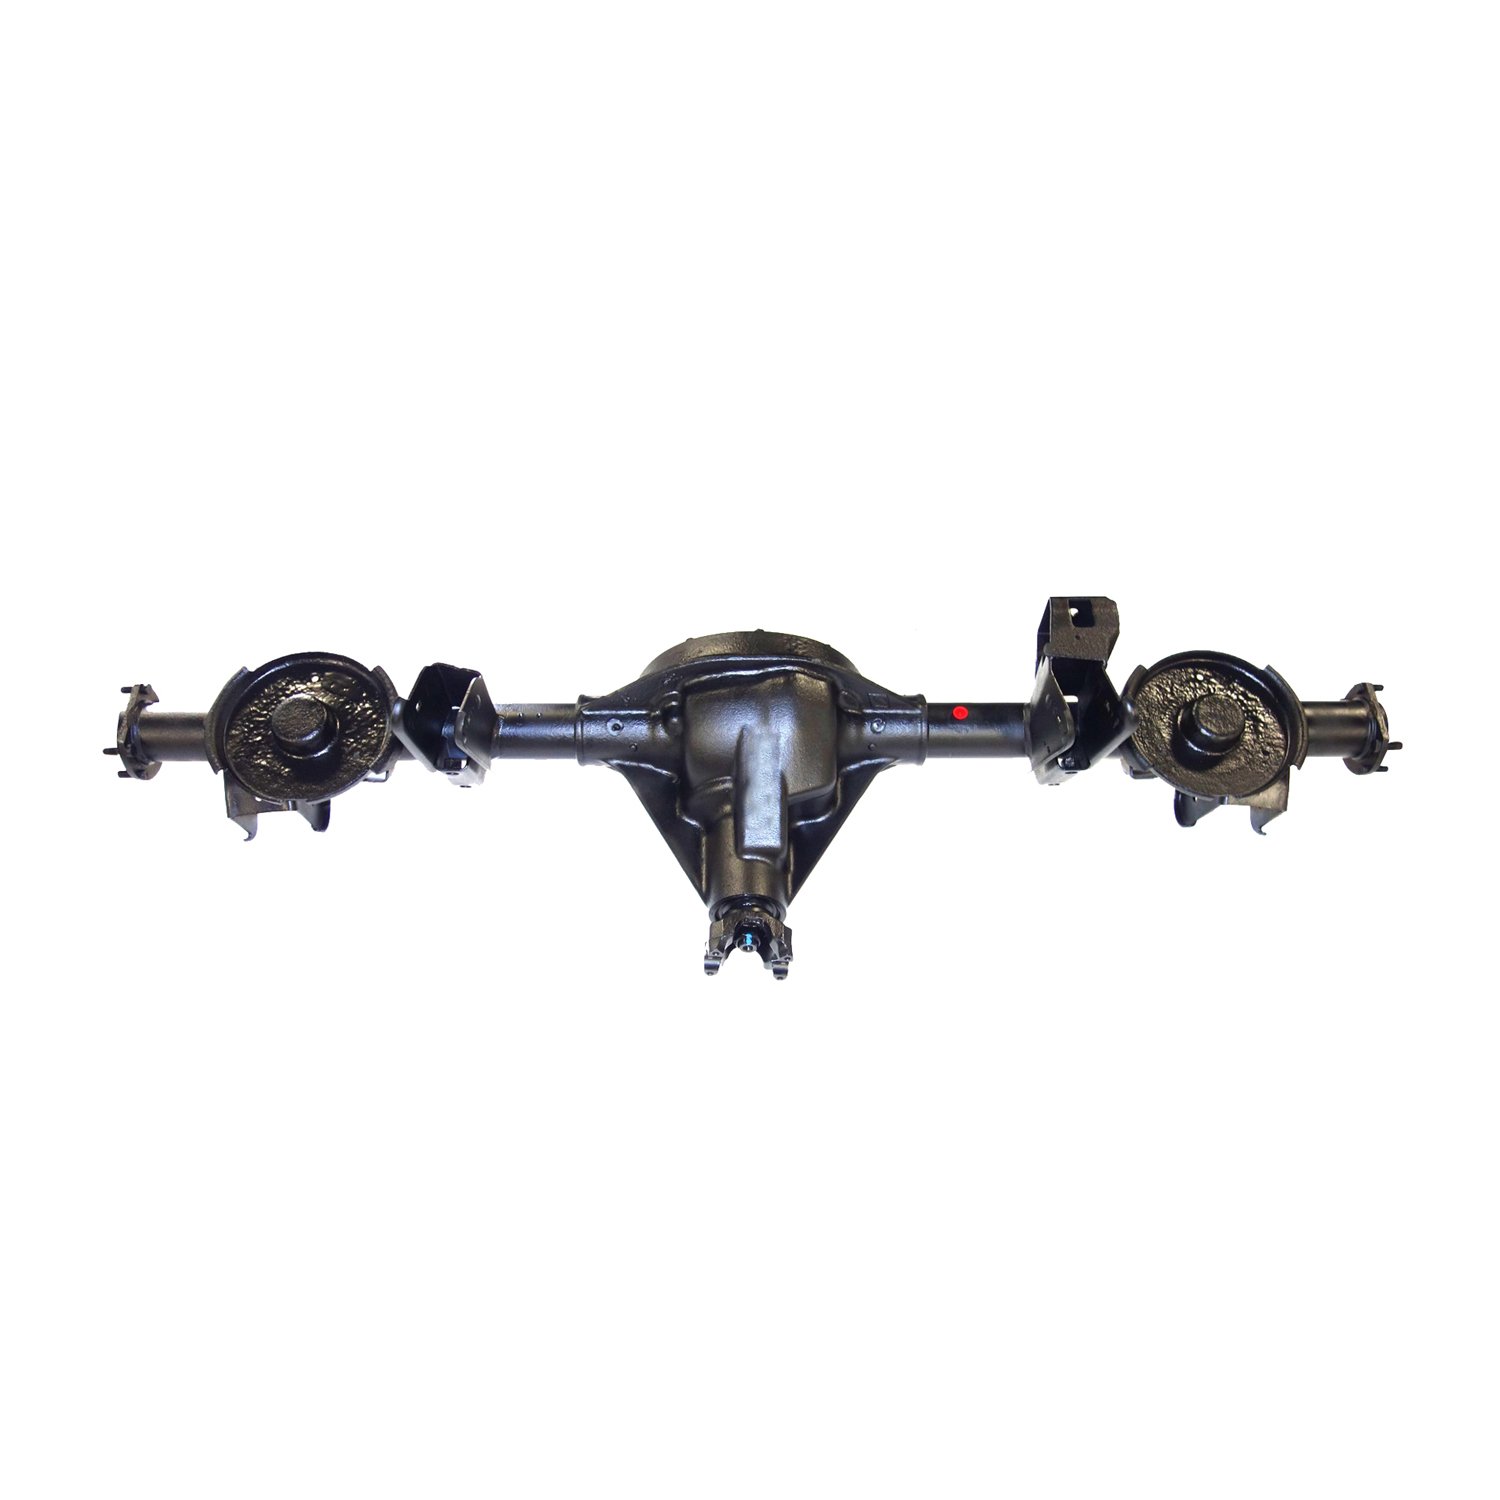 Remanufactured Complete Axle Assembly for Dana 35 99-04 Grand Cherokee 3.55 , Posi LSD